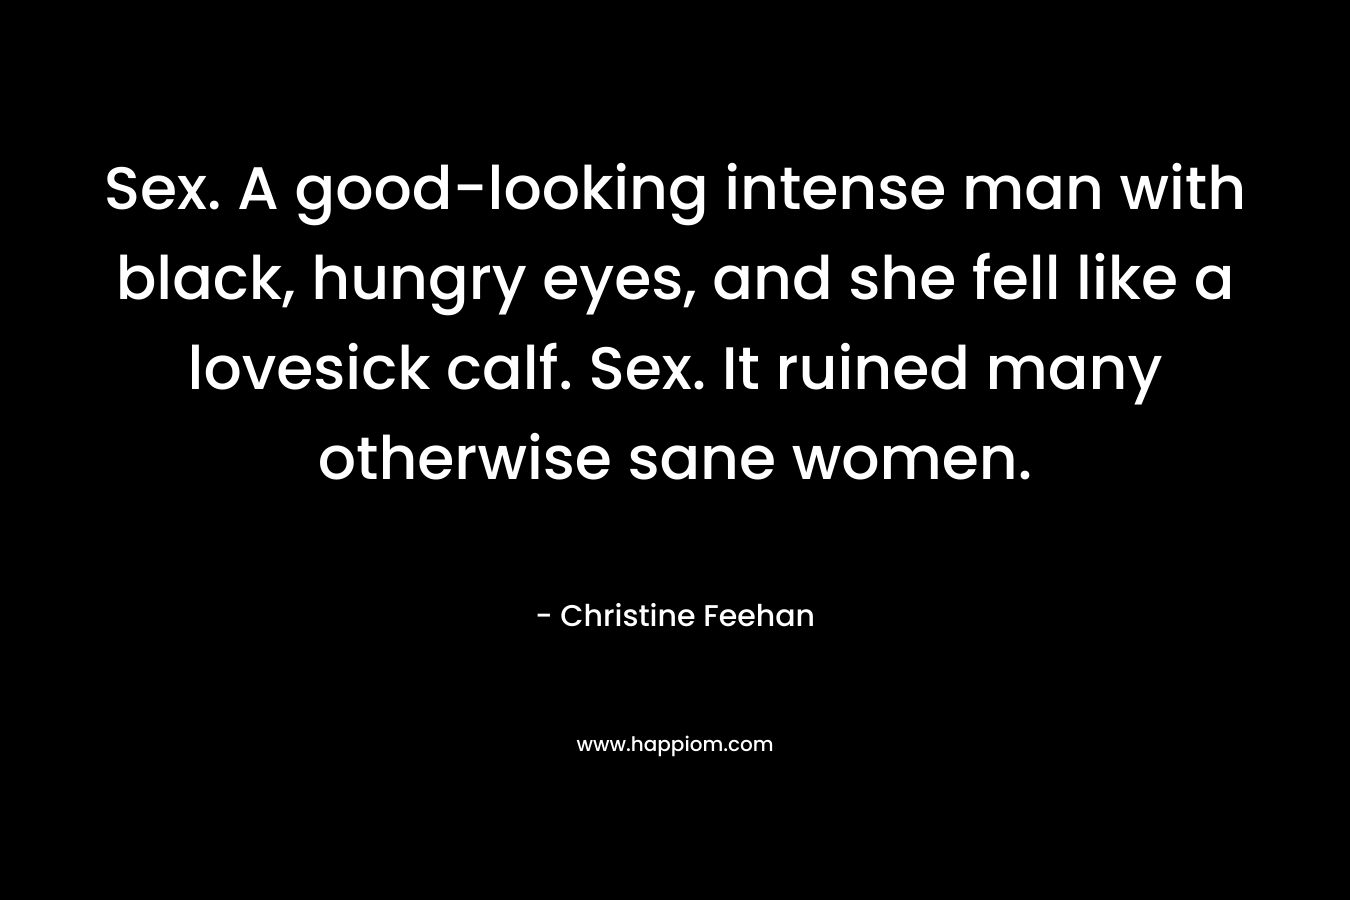 Sex. A good-looking intense man with black, hungry eyes, and she fell like a lovesick calf. Sex. It ruined many otherwise sane women. – Christine Feehan